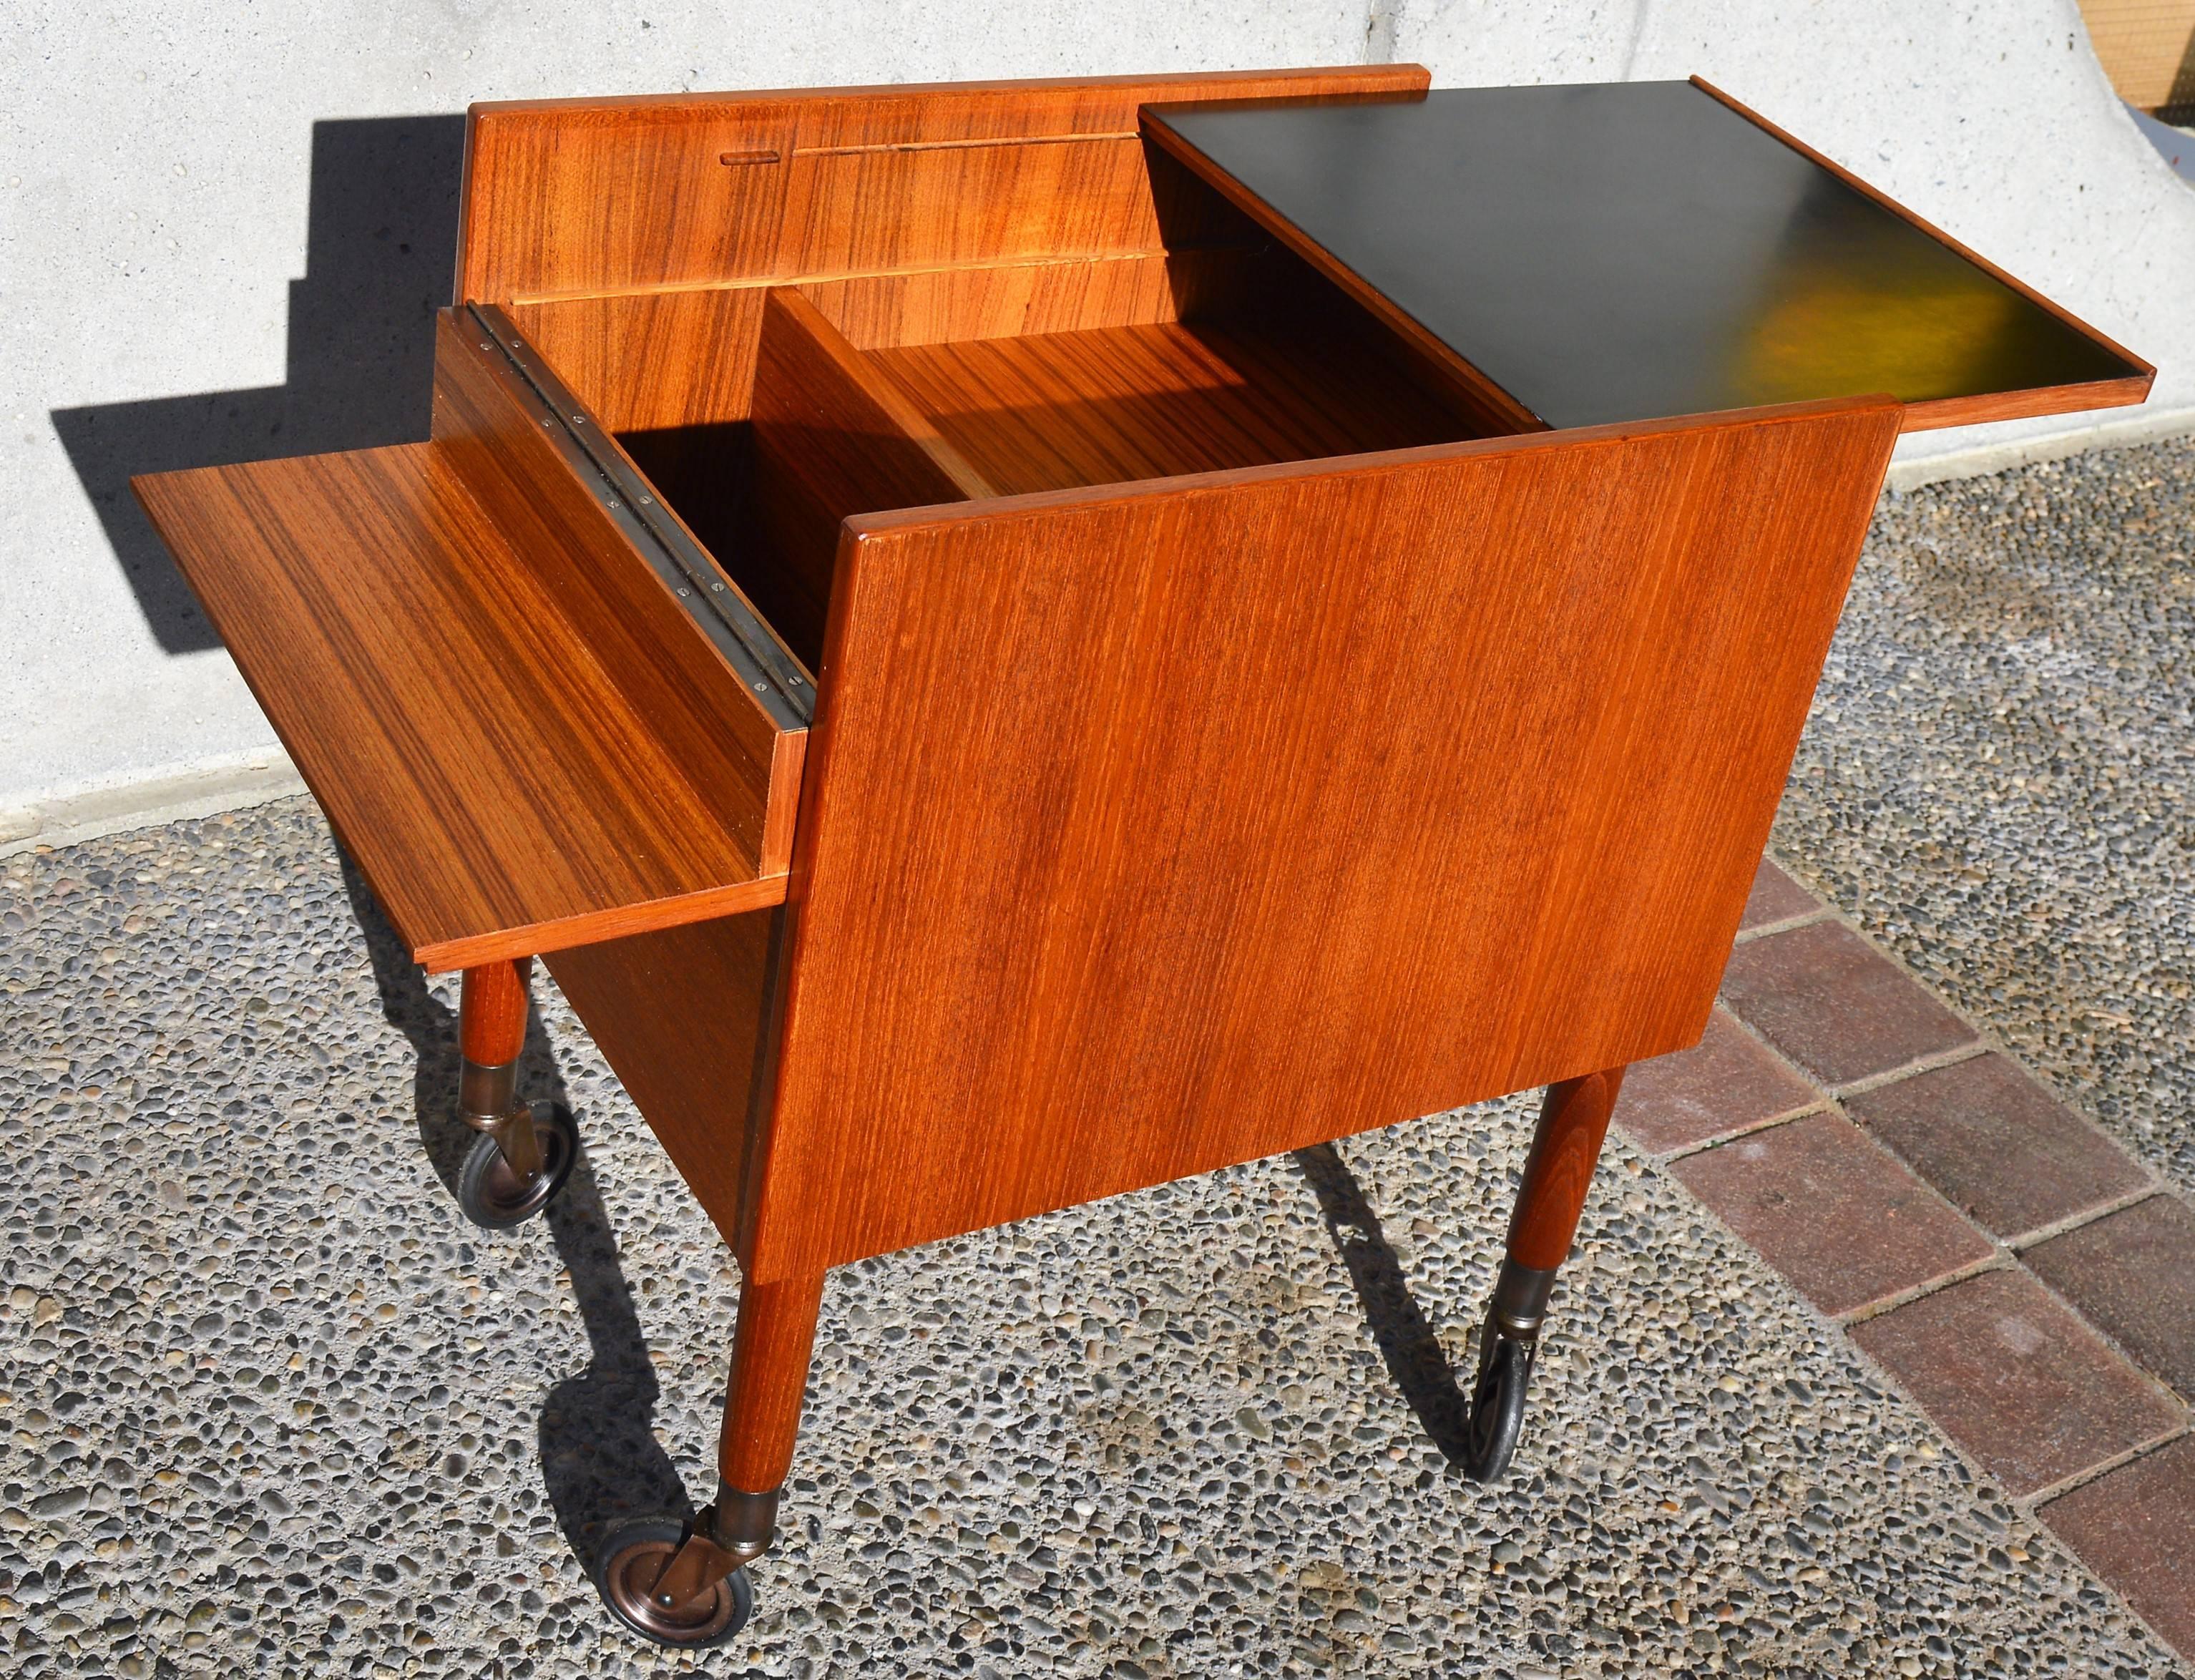 This super unique Scandinavian teak side table, storage cart, file cabinet or bar on copper casters has hidden storage inside. Slide the black laminate surface forward and flip open the back section which has a brass piano hinge to access the